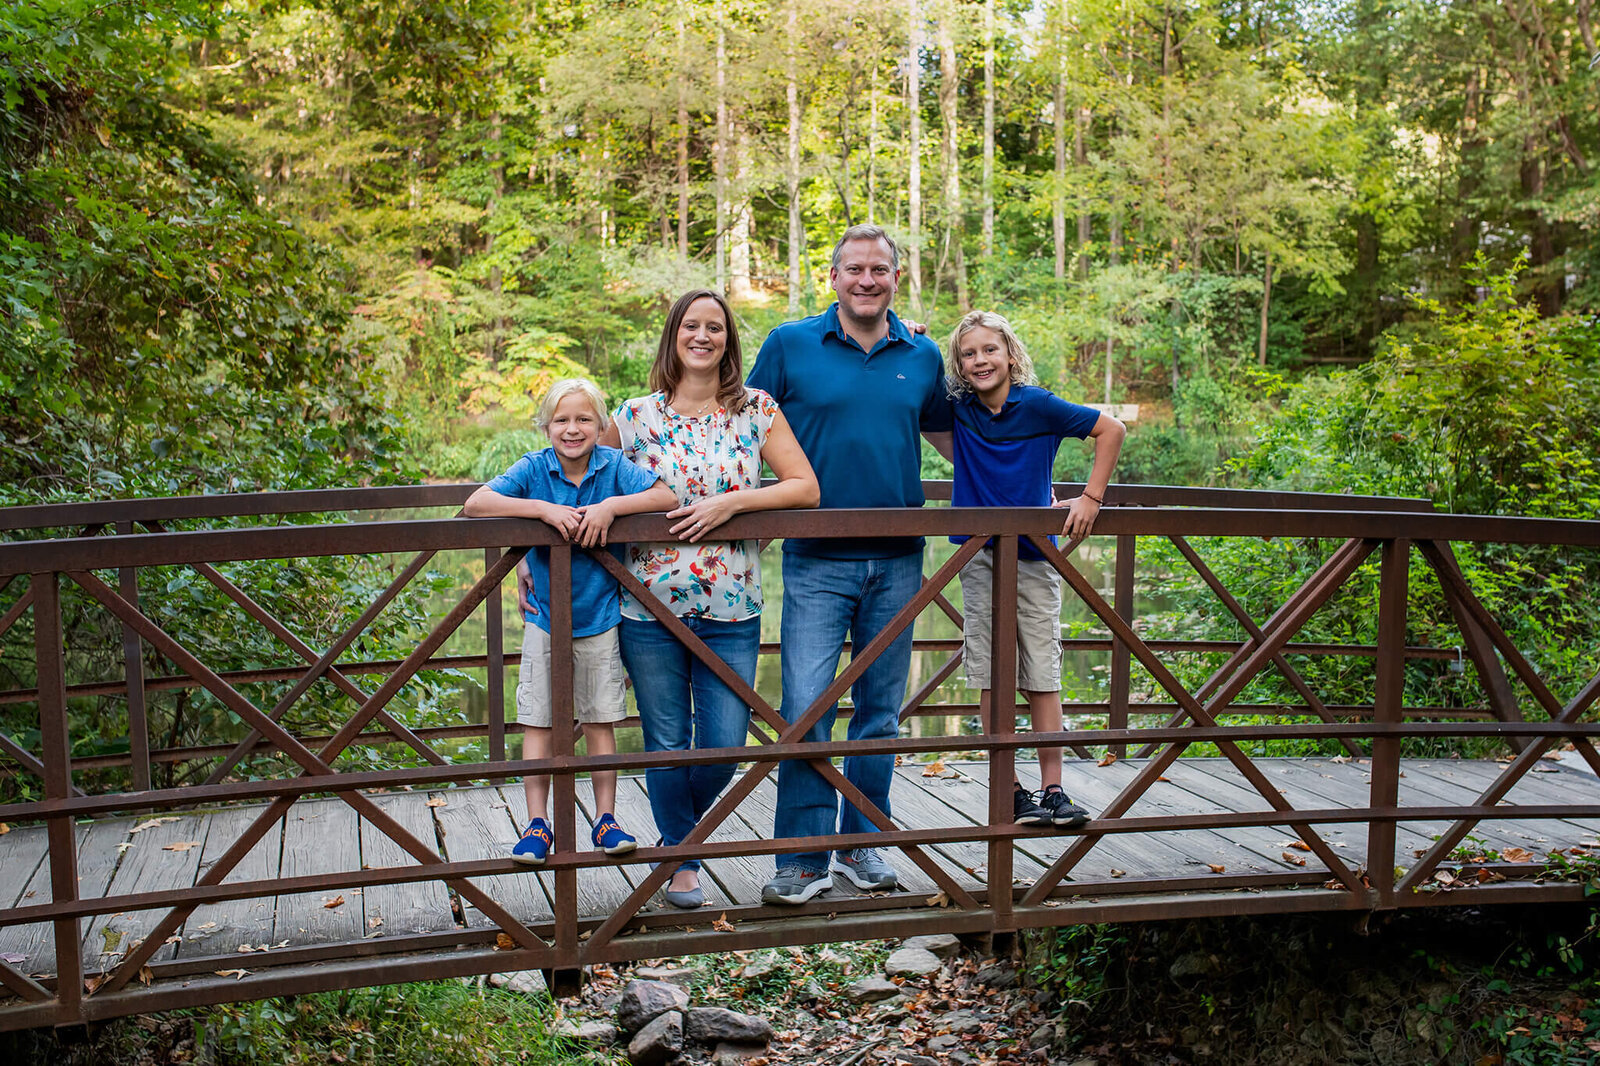 A family of four posing on a bridge at a park in Northern Virginia.